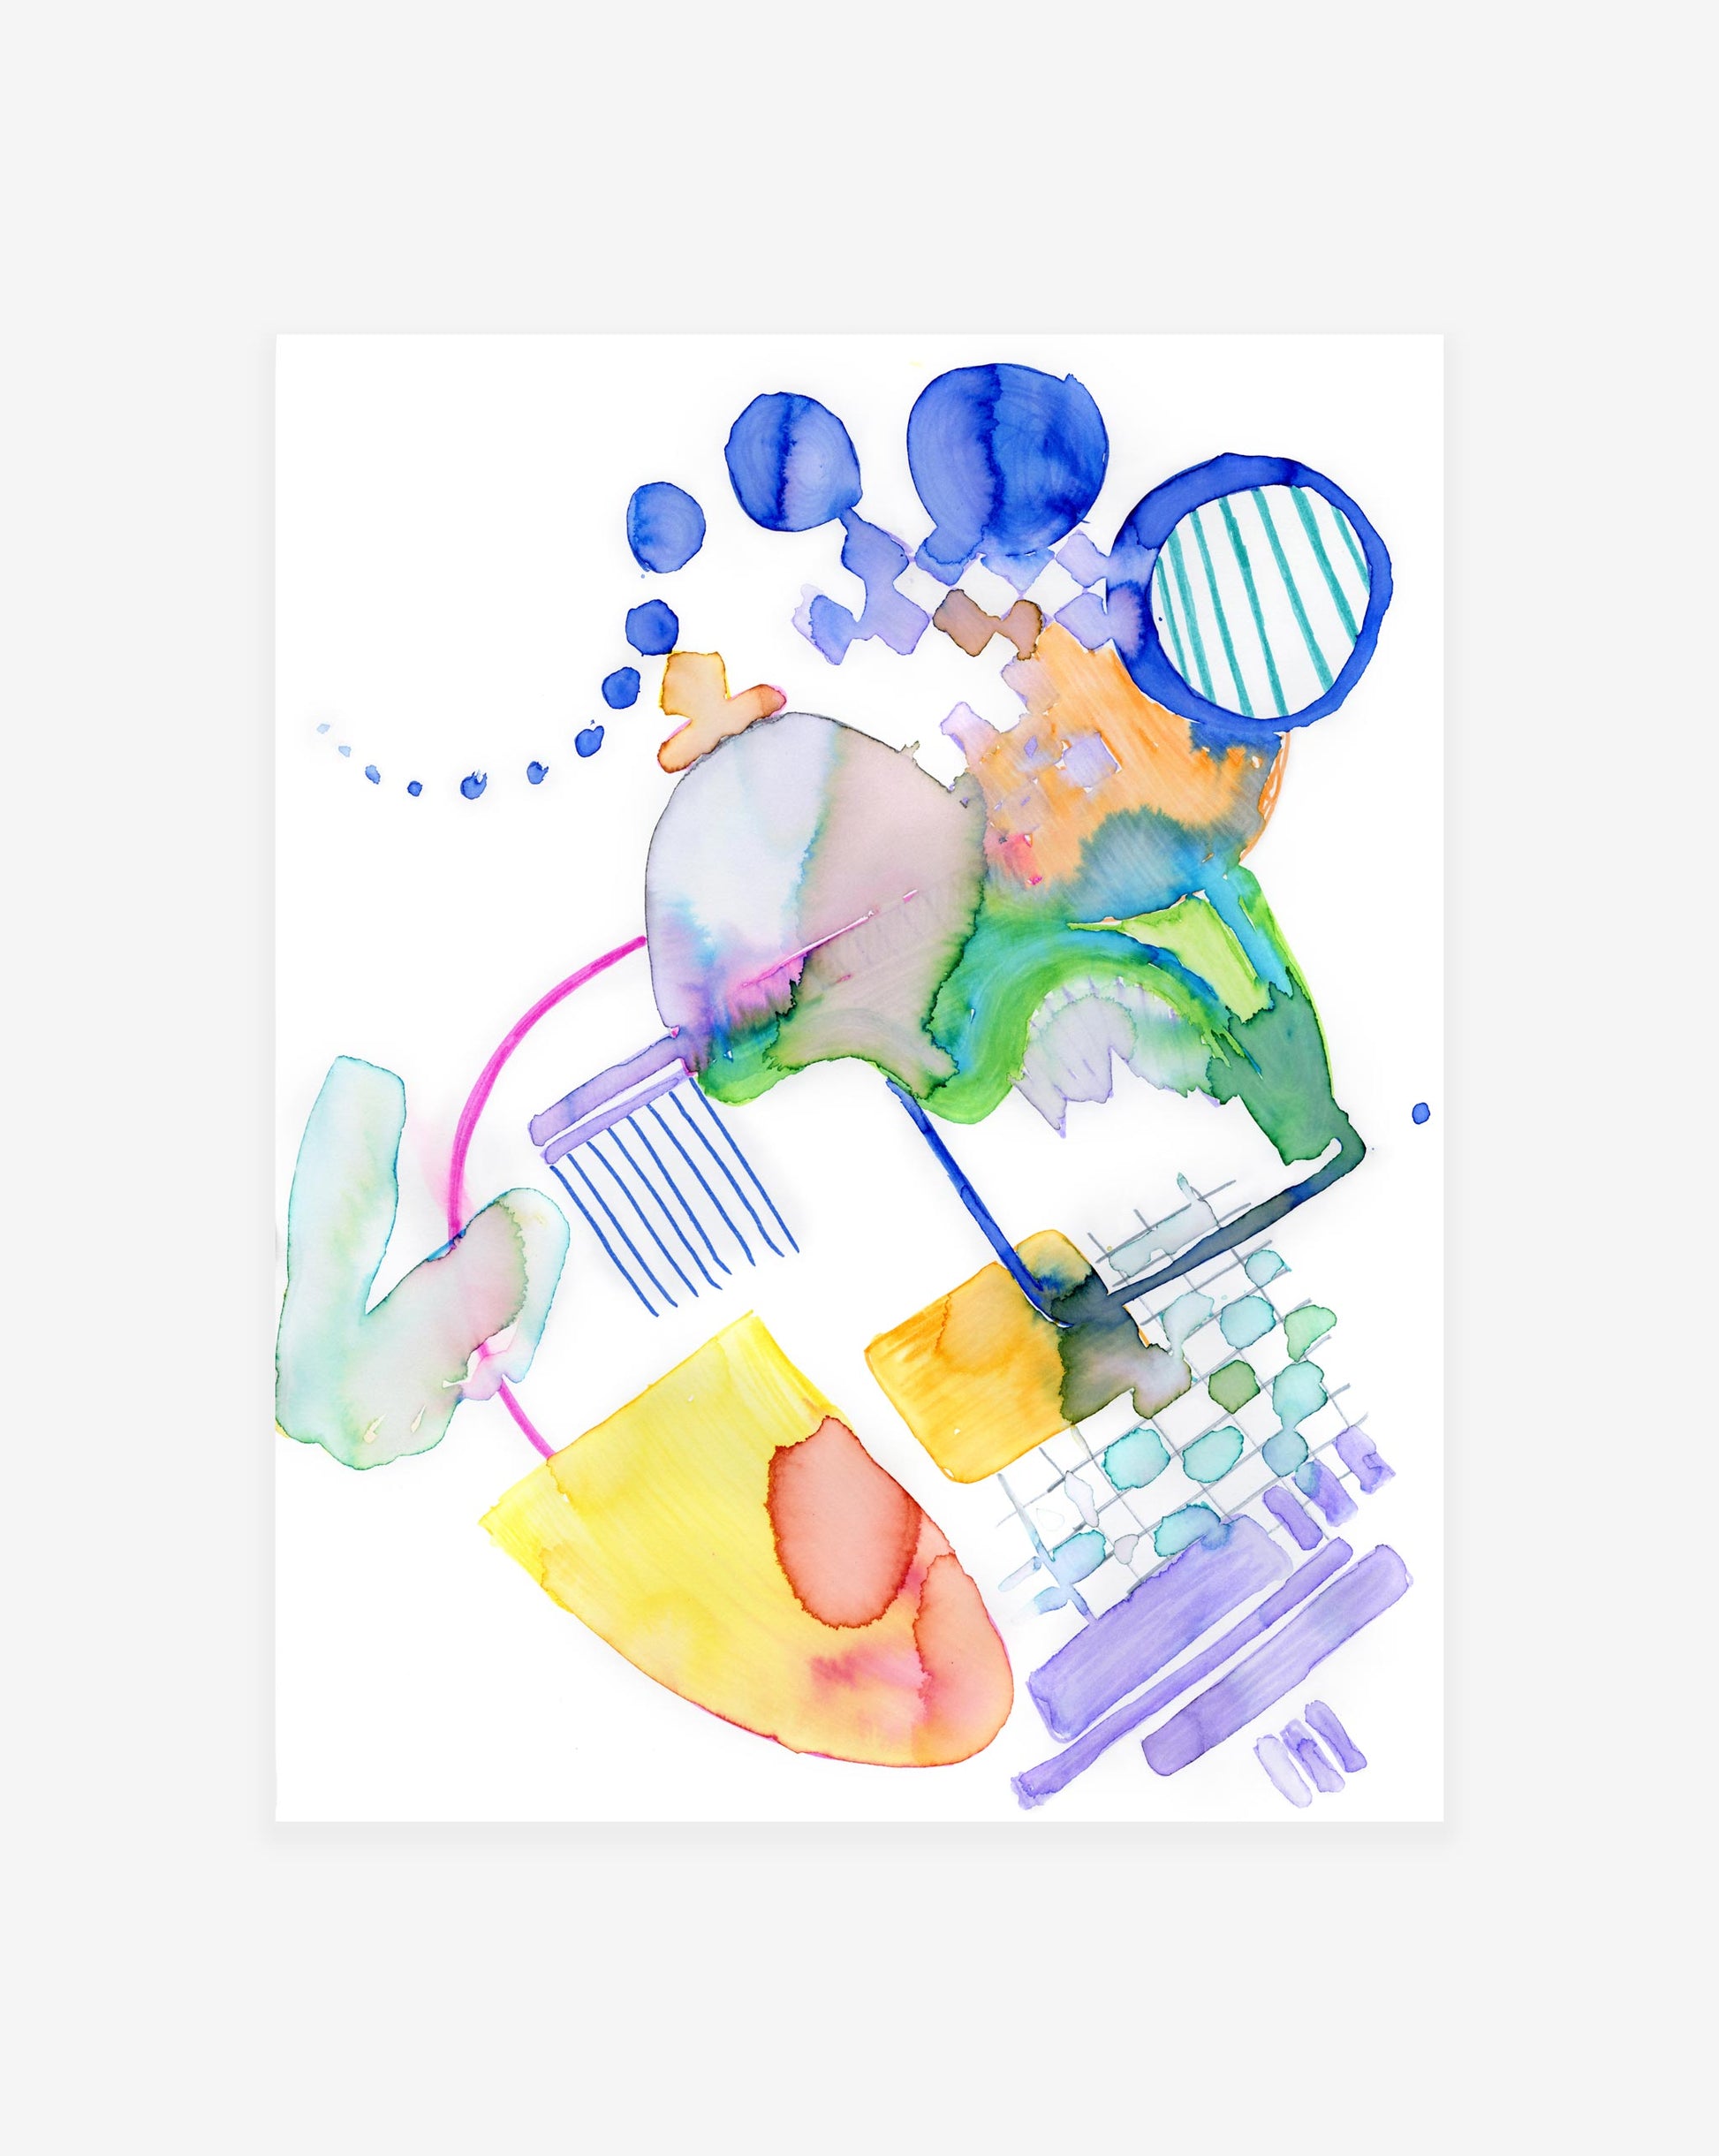 A Sea Galaxy Print by artist and Eskayel founder, featuring a colorful abstract design